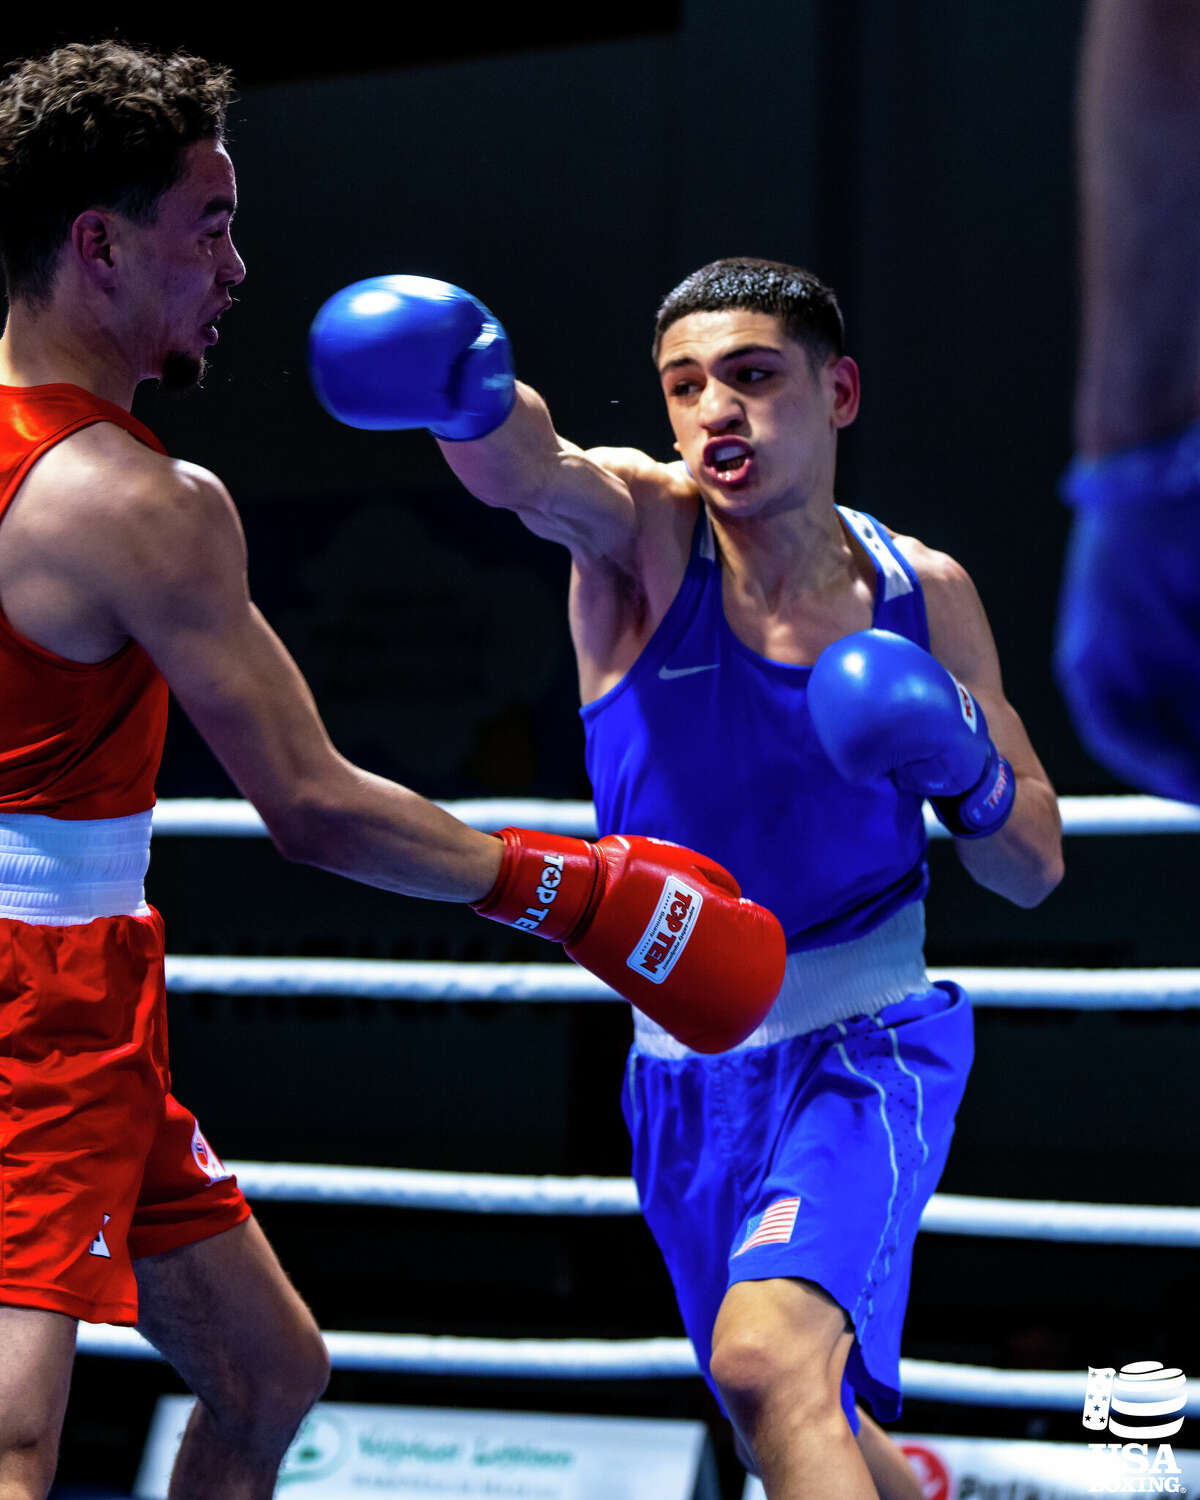 Emilio Garcia has earned three straight victories by unanimous decision including two over Olympic boxers to reach the championship bout at the GeeBee Tournament in Helsinki, Finland representing USA Boxing.